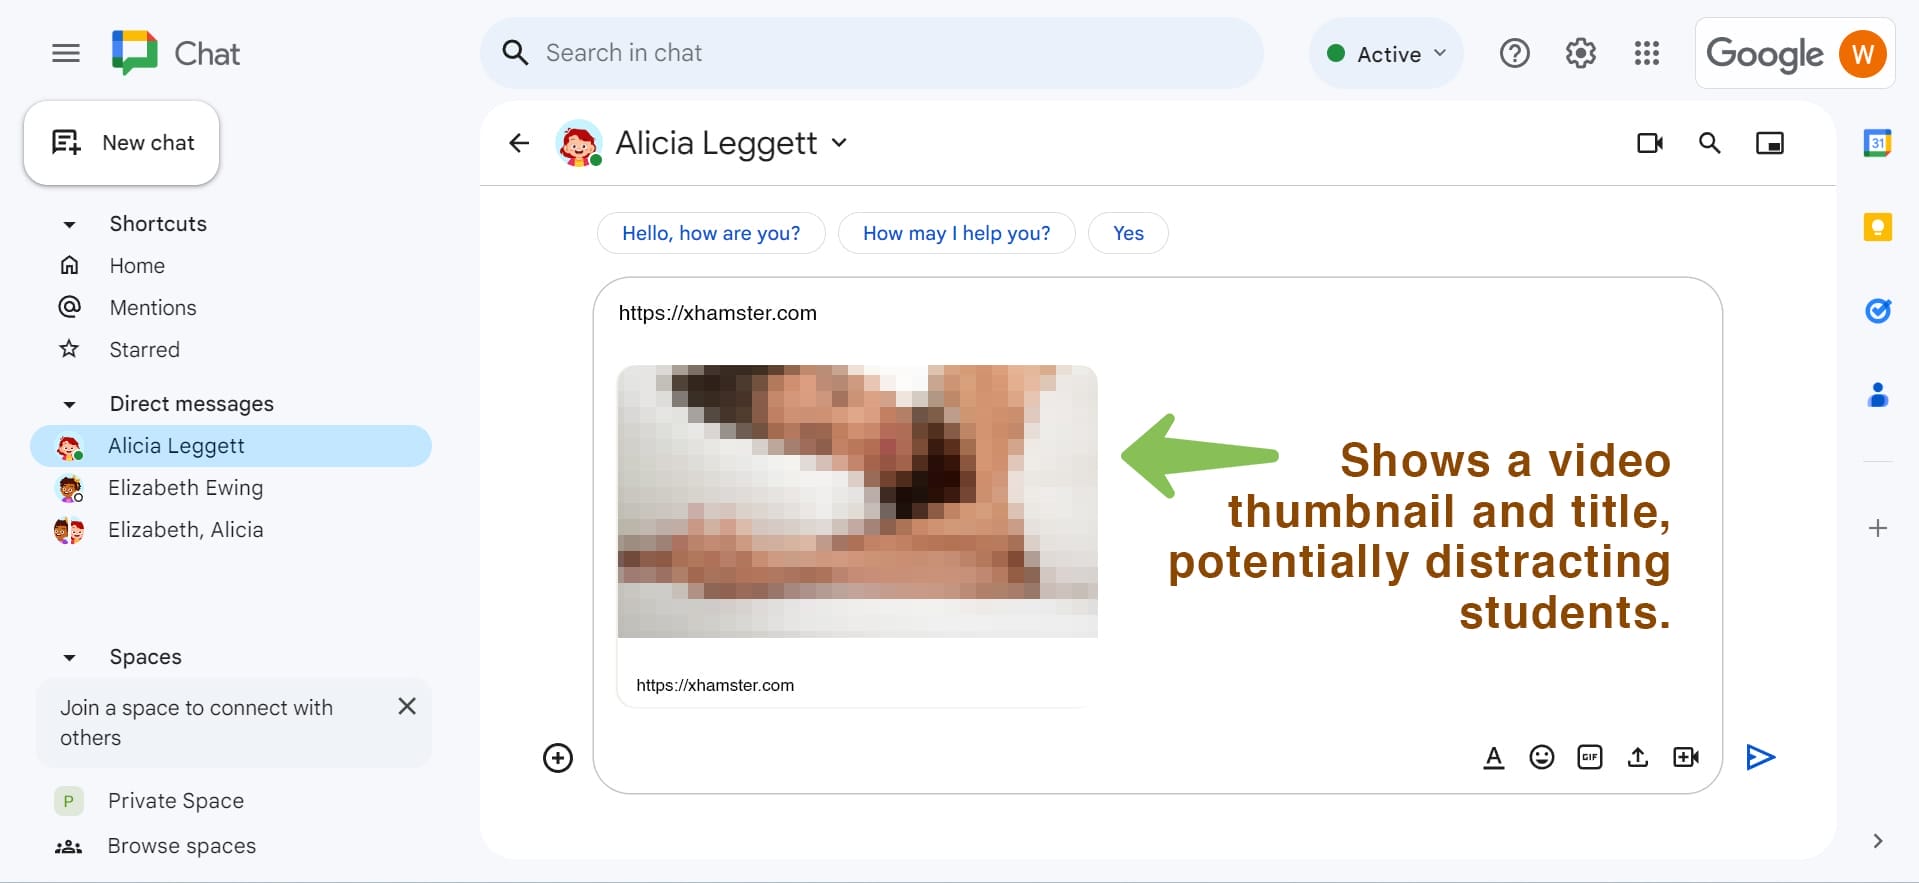 Google Chat without blocking link previews